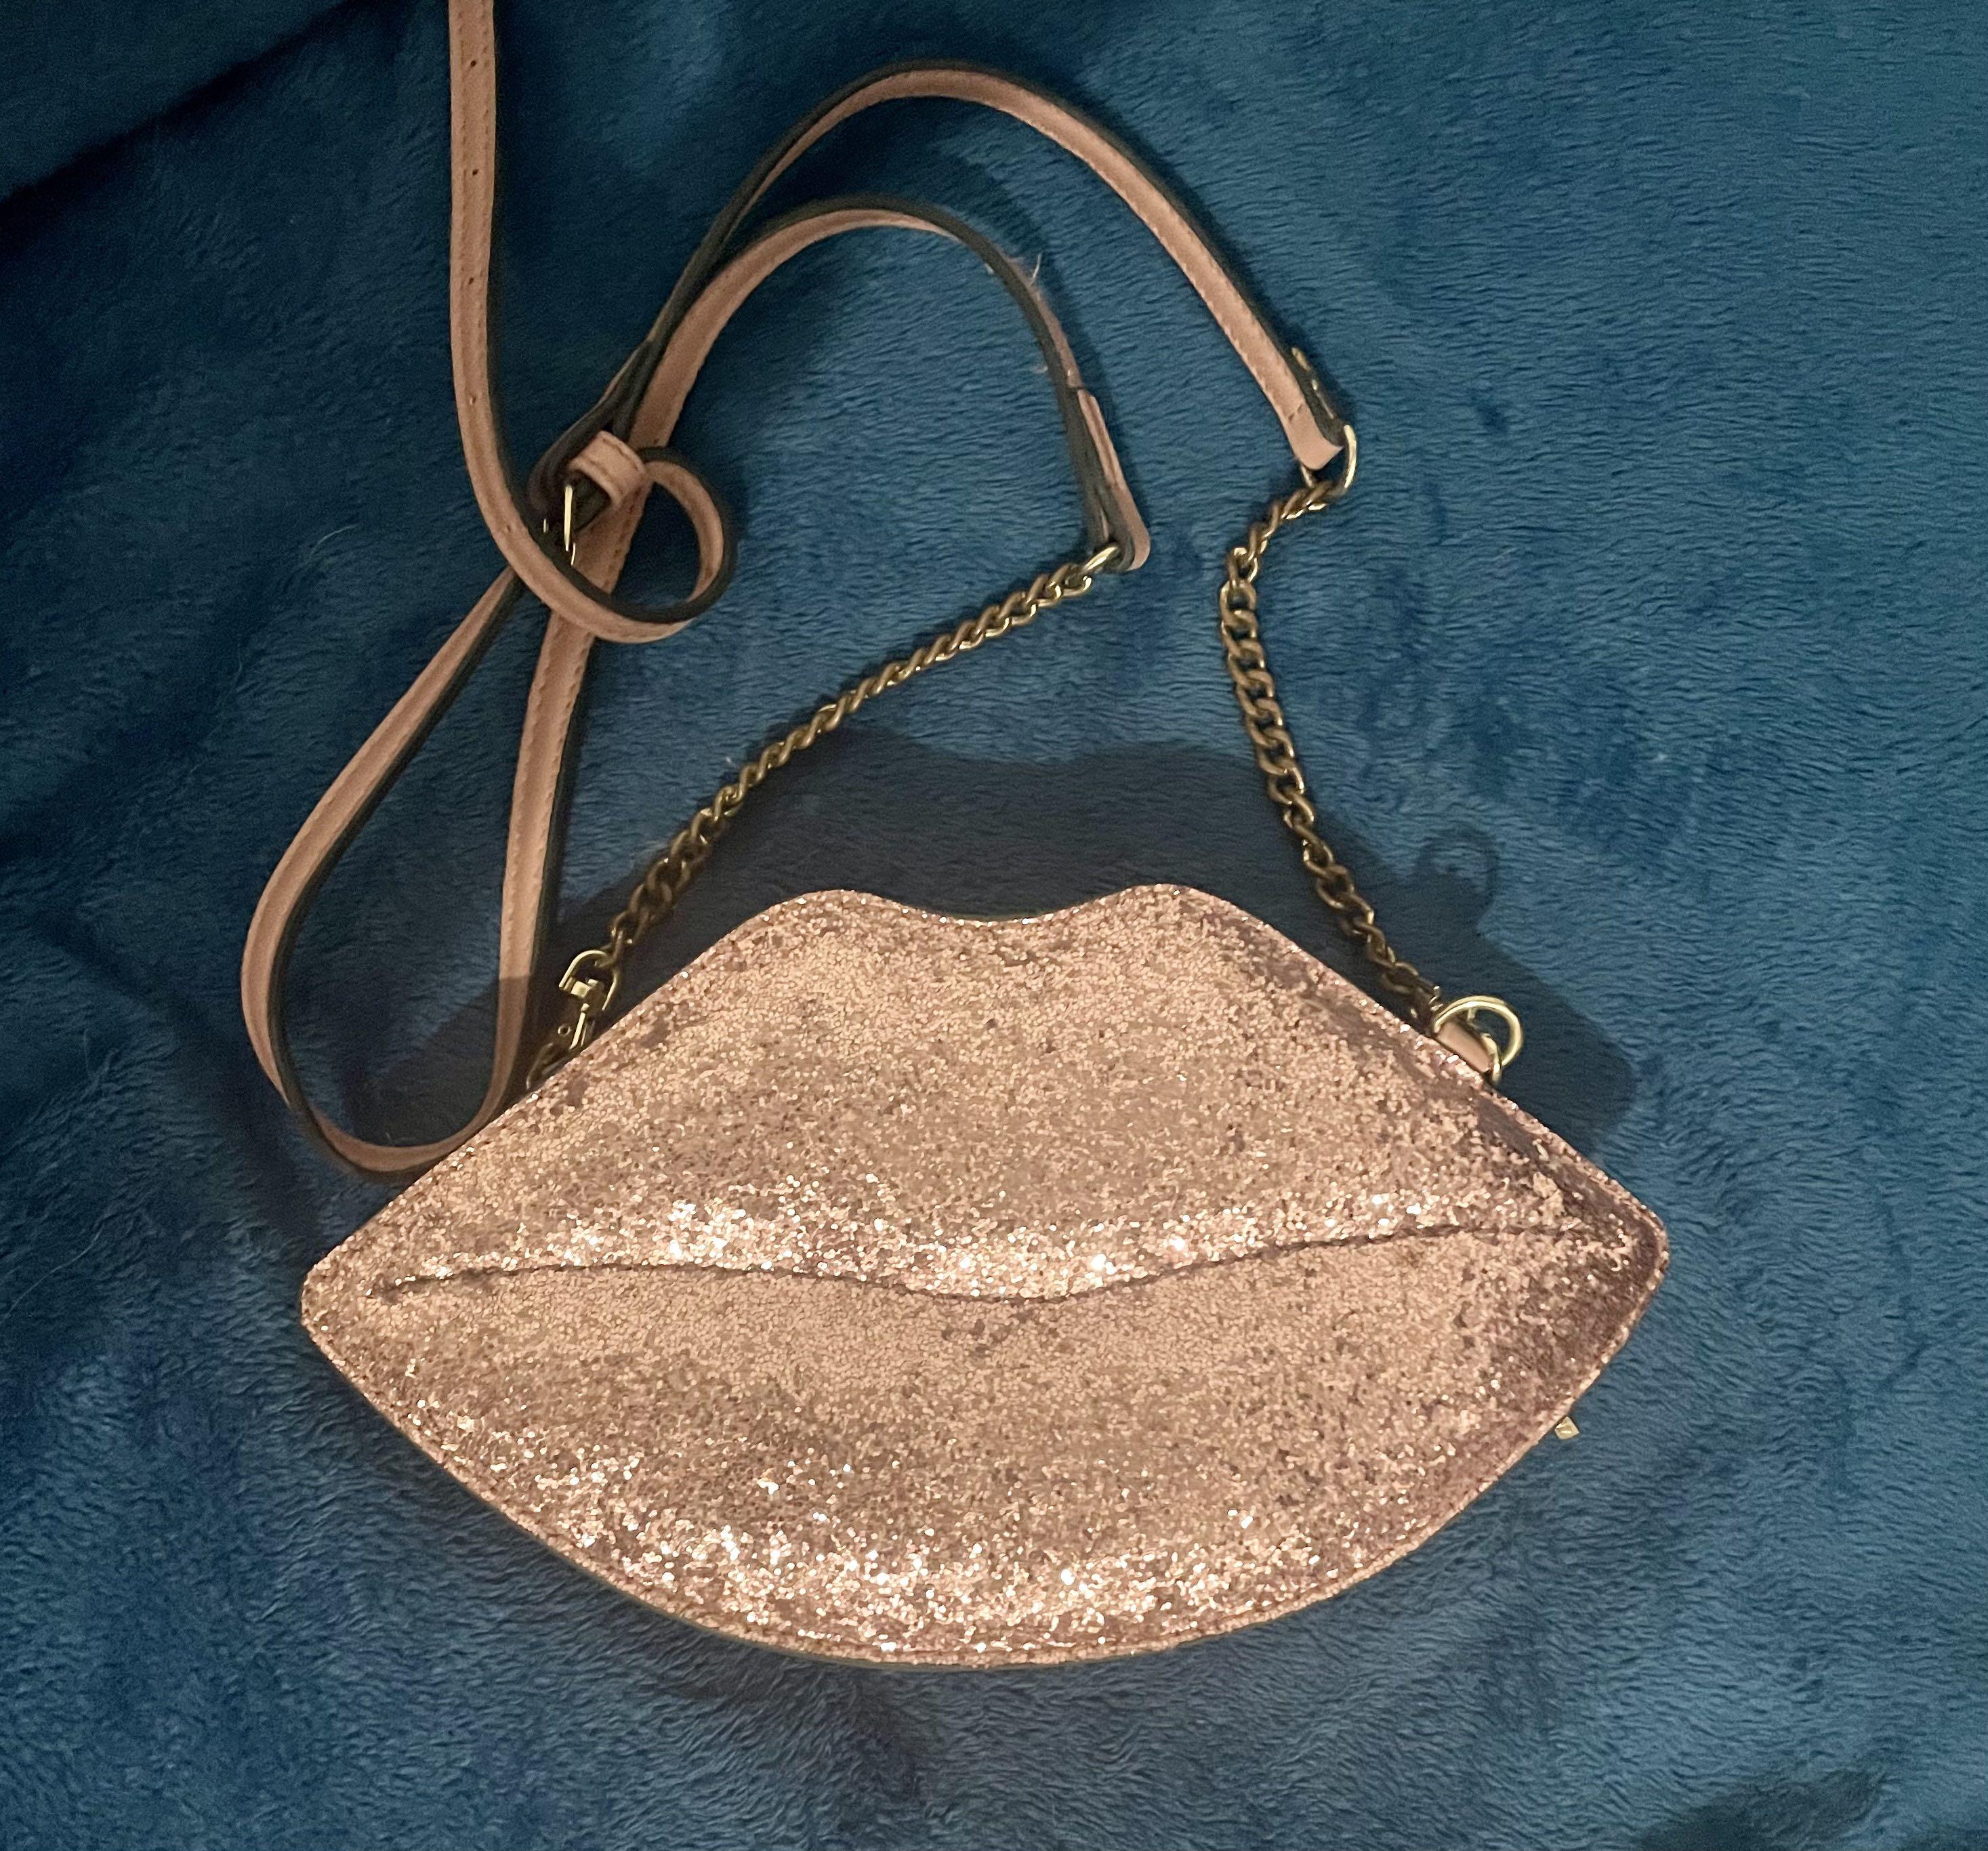 This $69 Sparkly Kate Spade Bag is the Perfect Going Out Bag